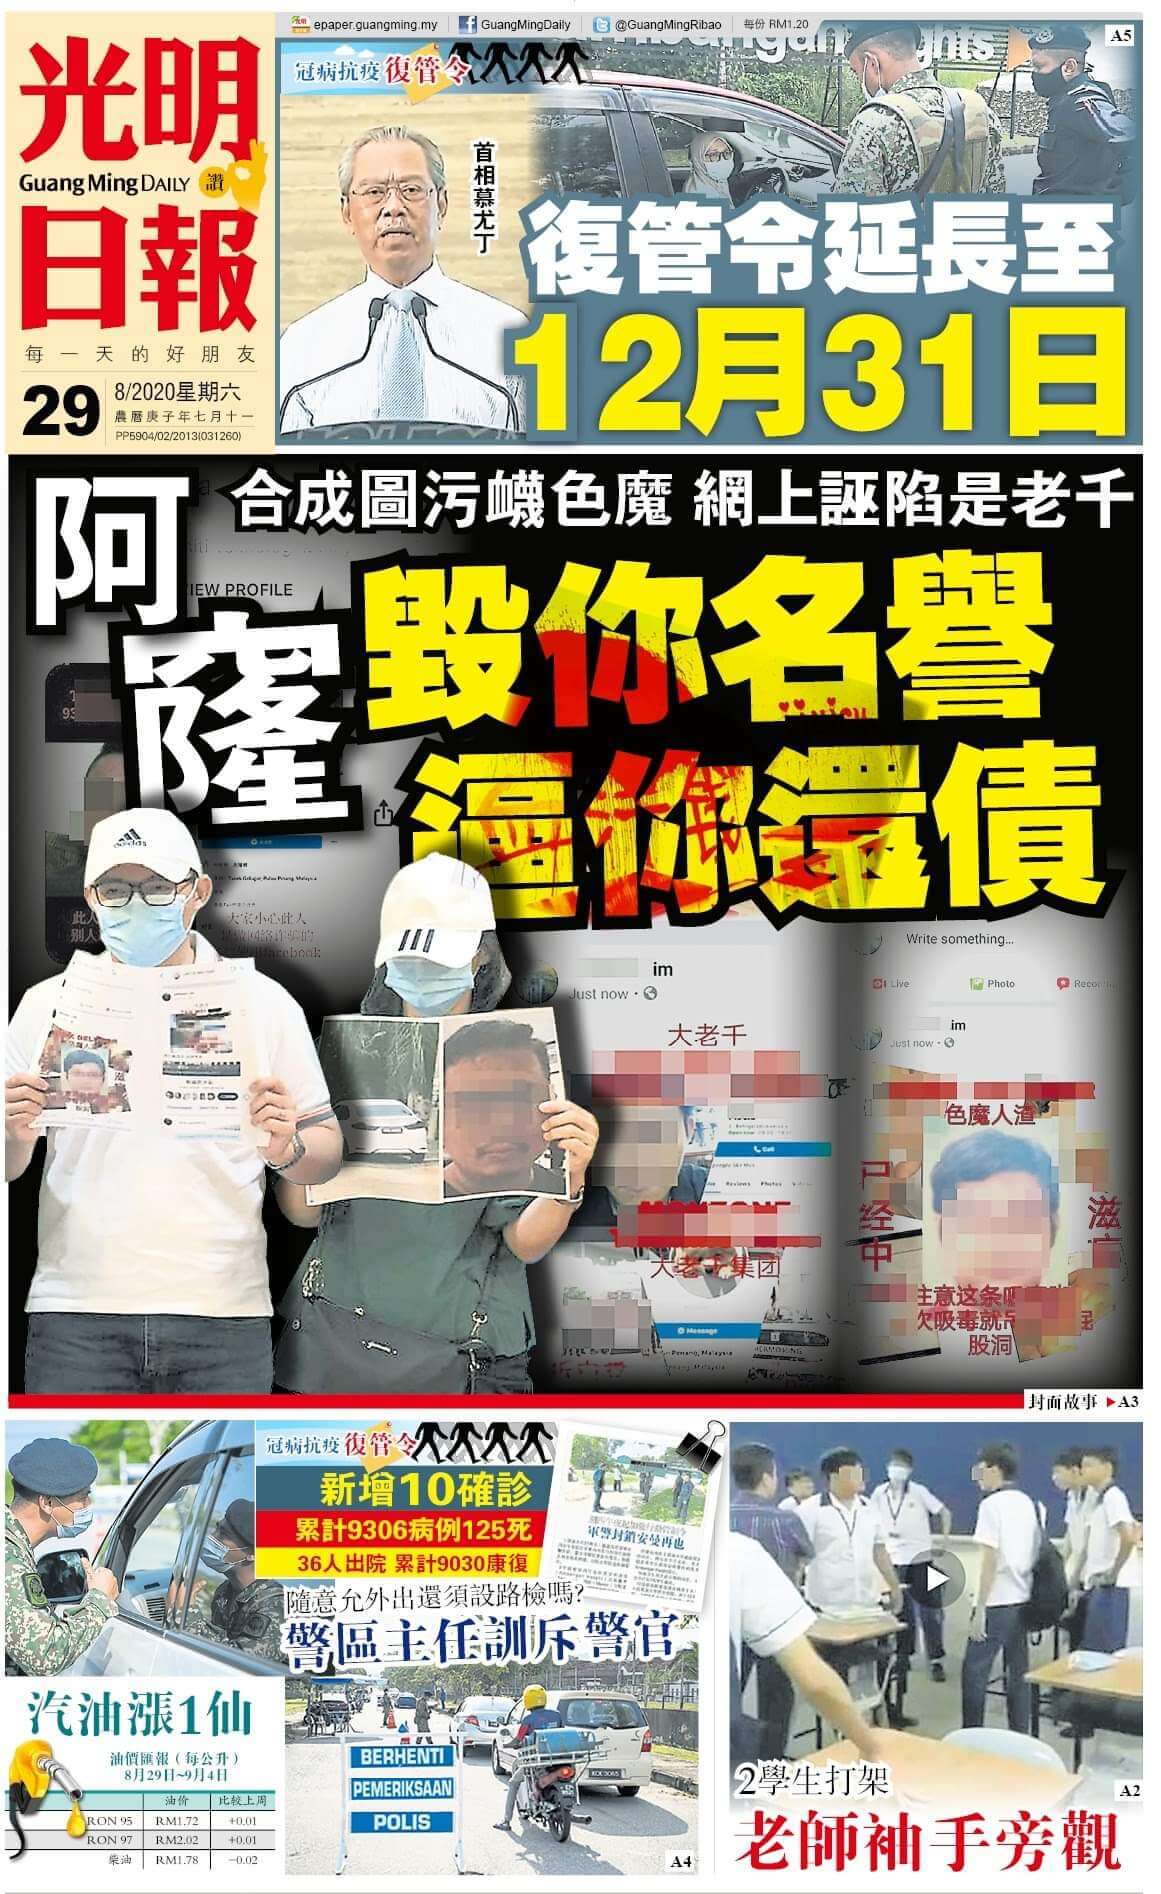 China Newspapers 2 Guangming Daily